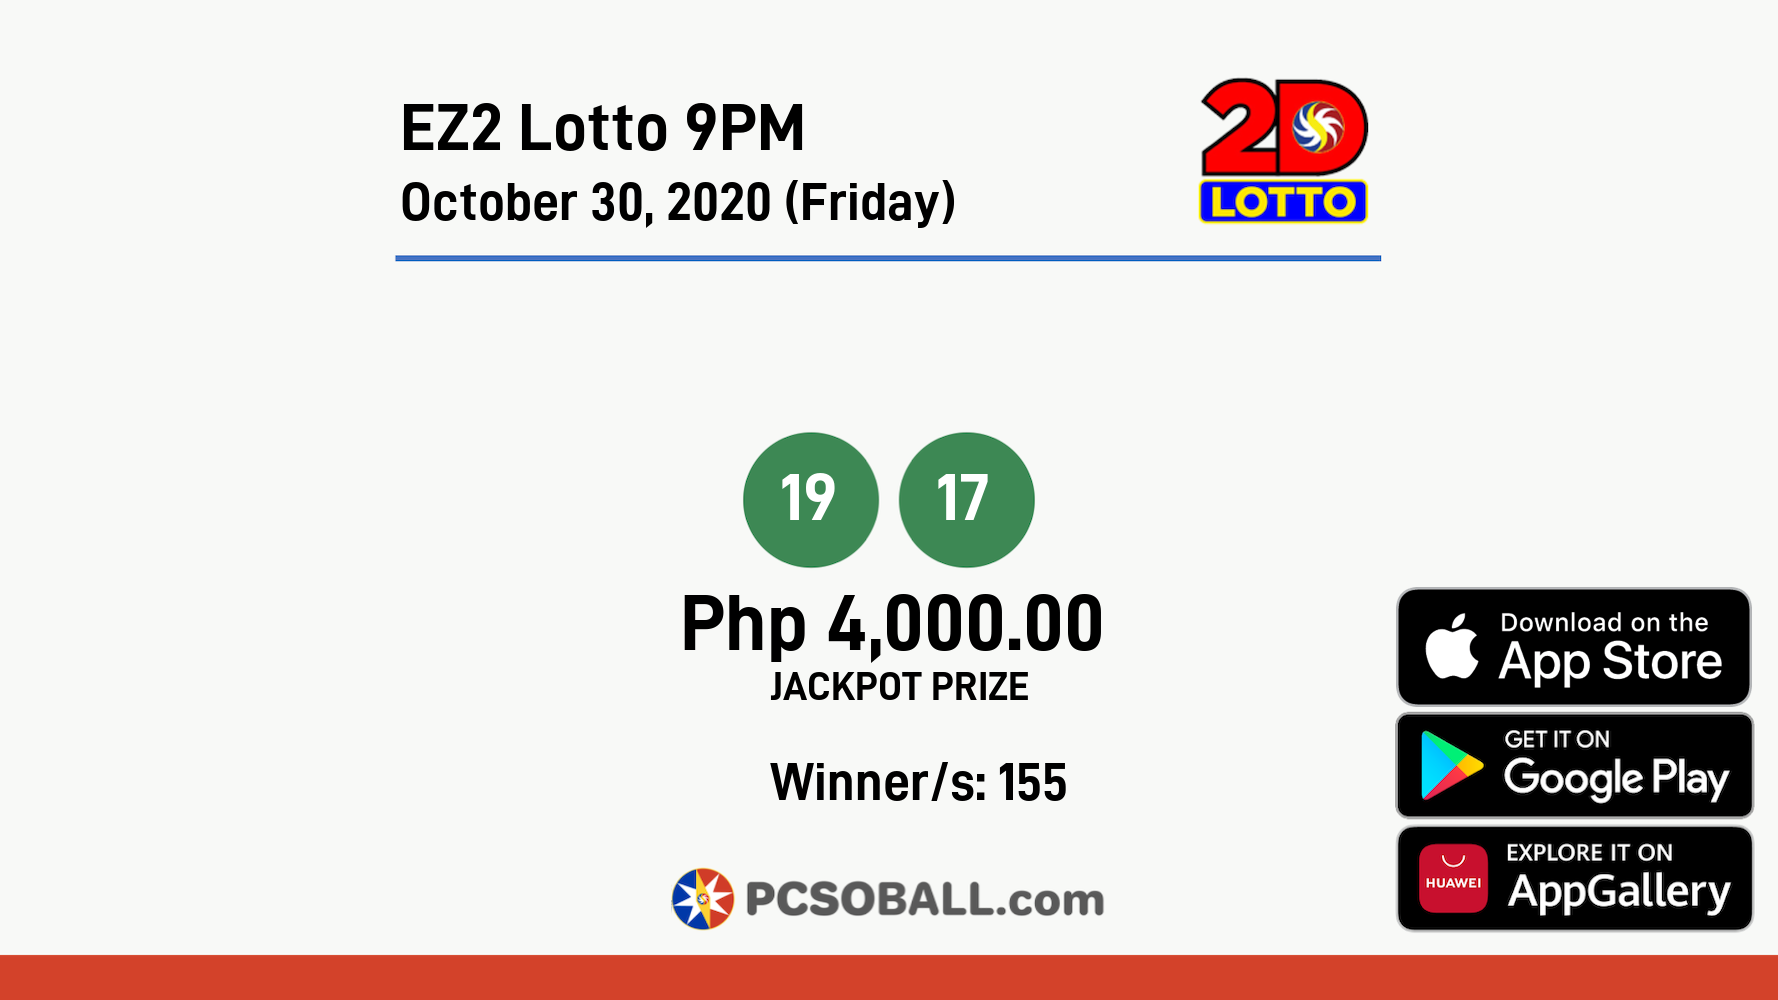 EZ2 Lotto 9PM October 30, 2020 (Friday) Result